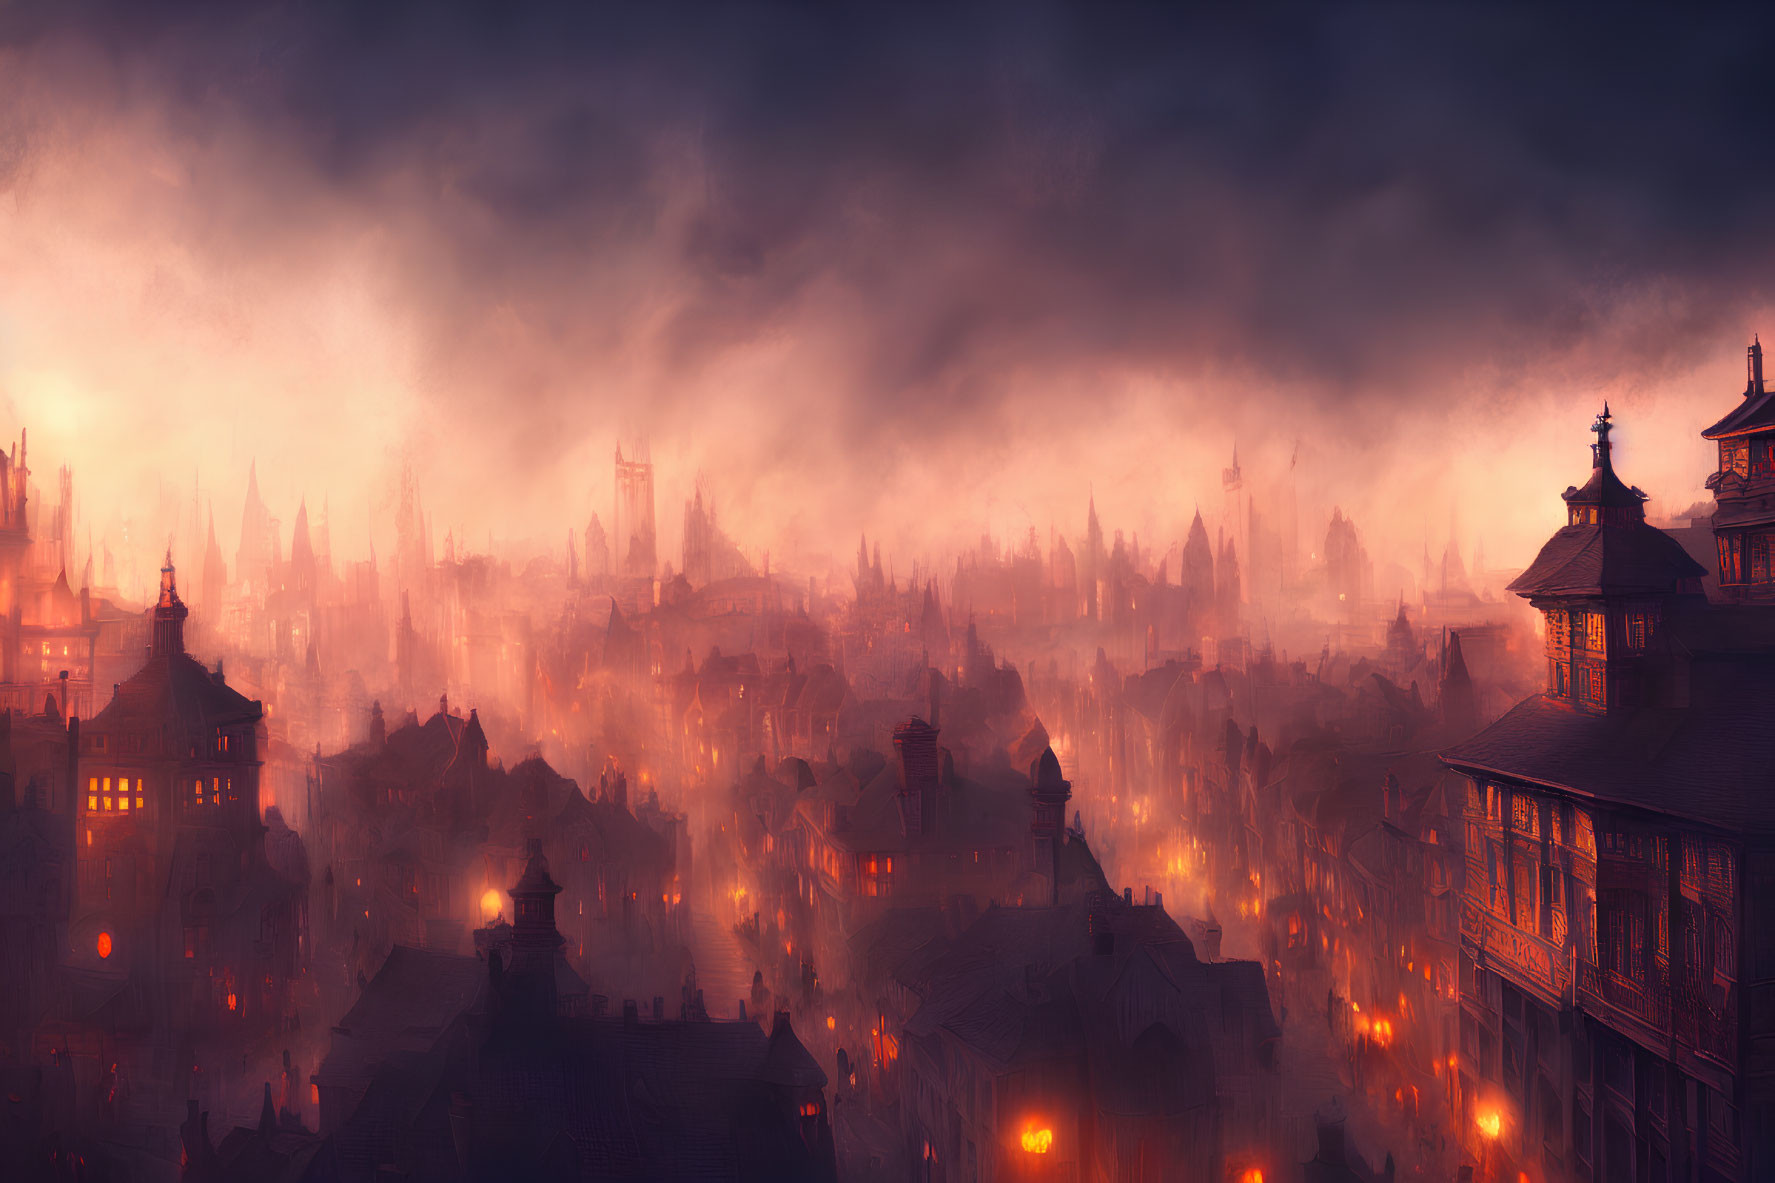 Mystical foggy cityscape at dusk with traditional architecture & glowing lights